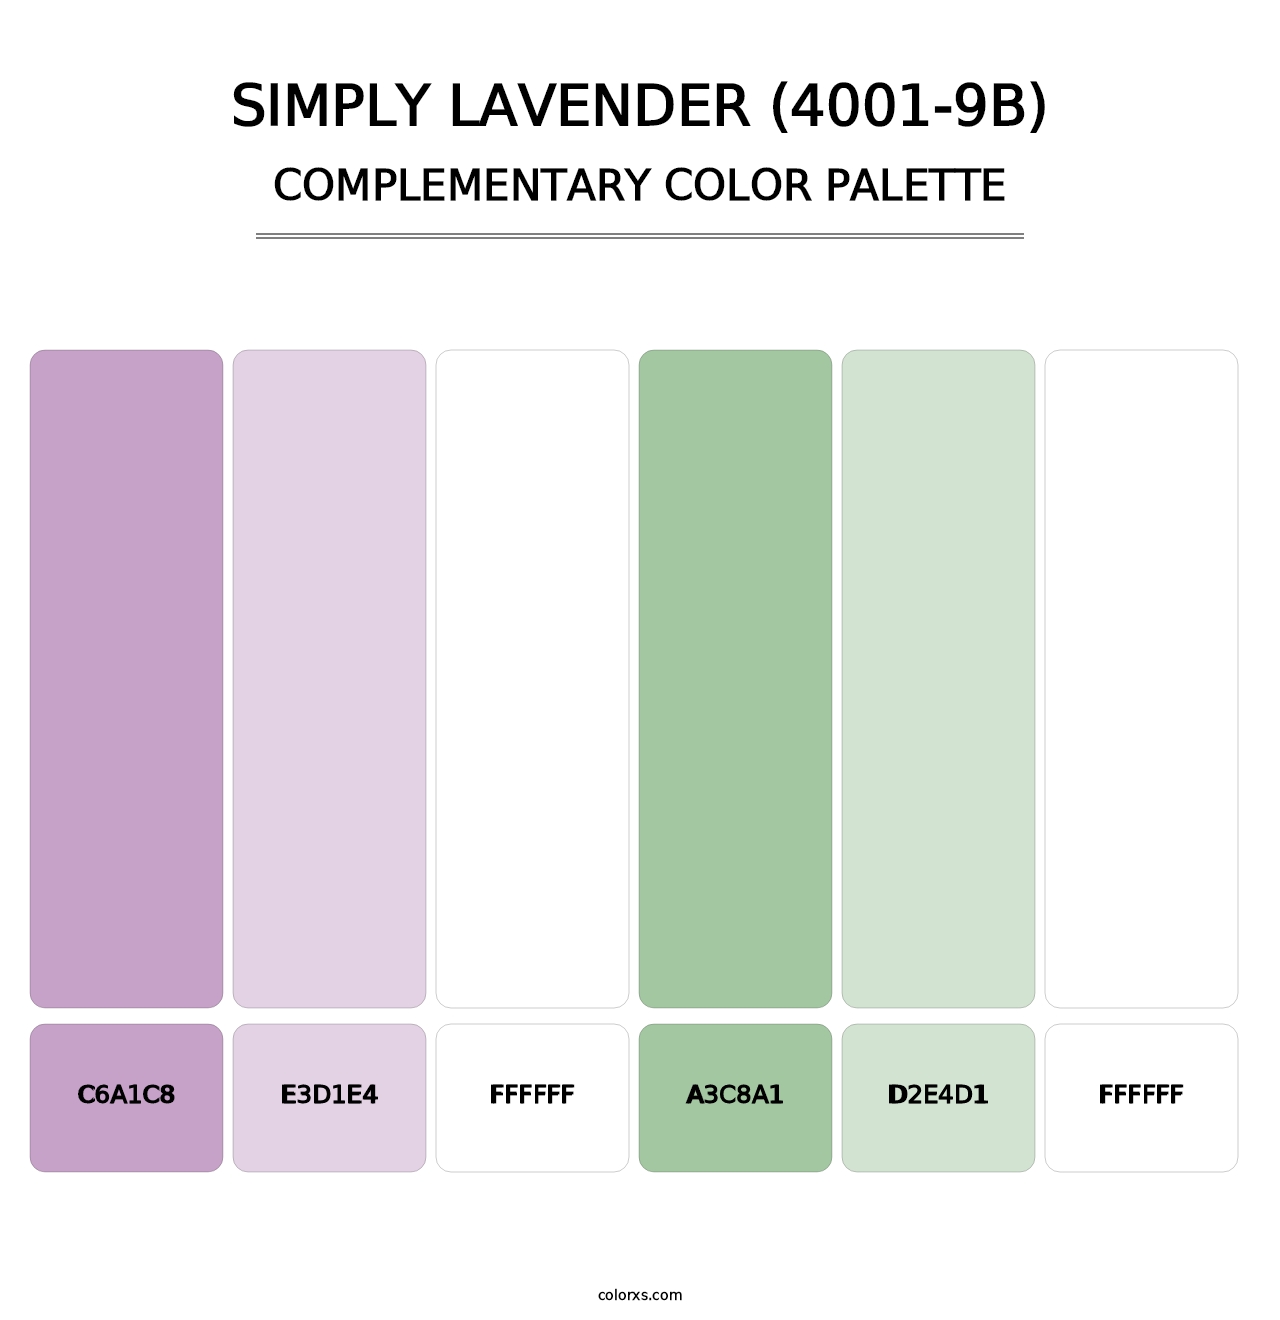 Simply Lavender (4001-9B) - Complementary Color Palette